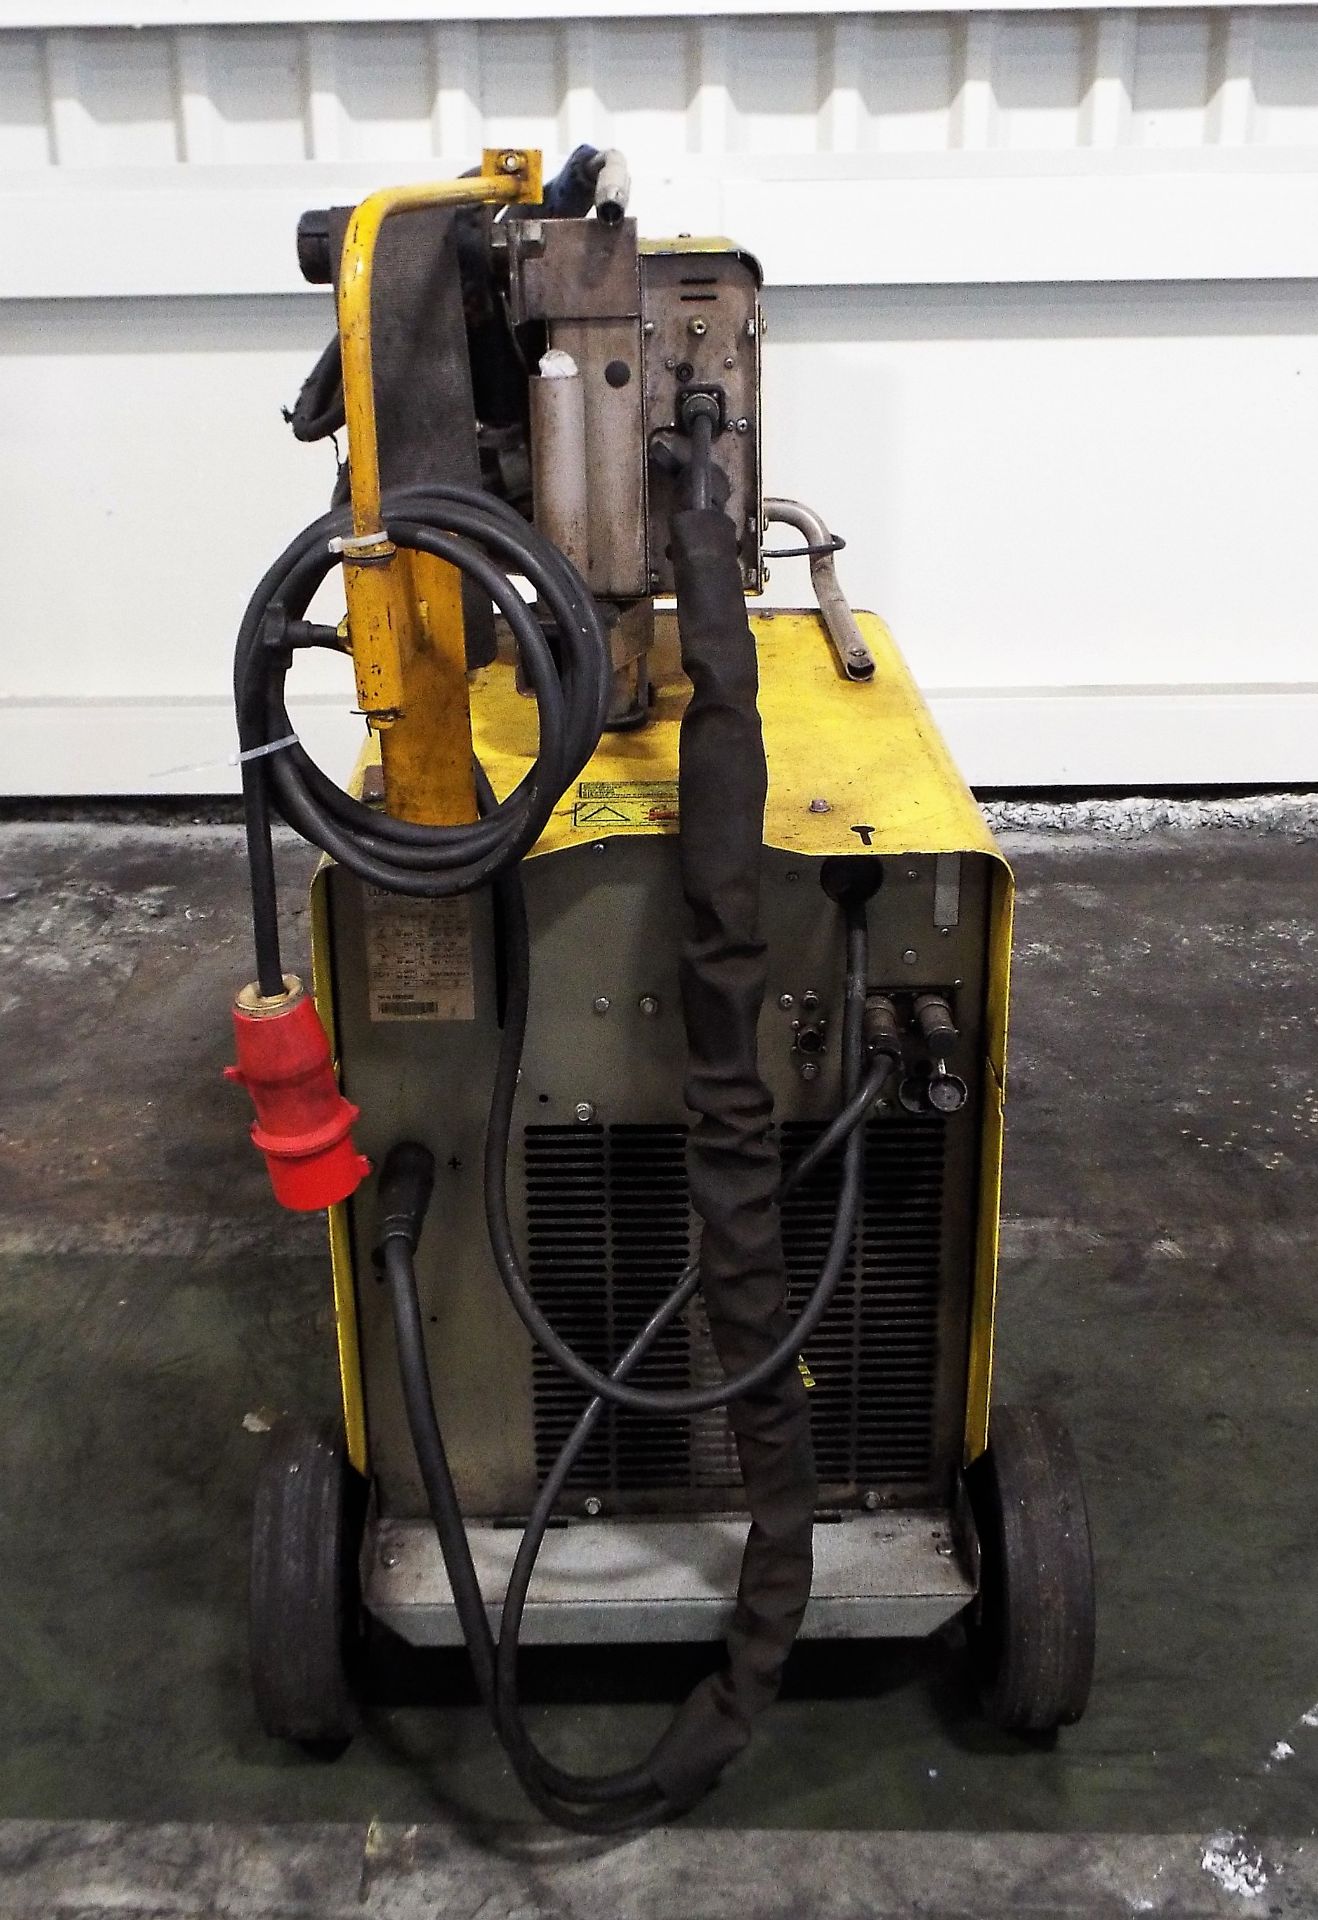 Esab Aristo Portable Welding Set complete with MEK 44C Wire Feed & PUA-1 Pendant. - Image 3 of 8